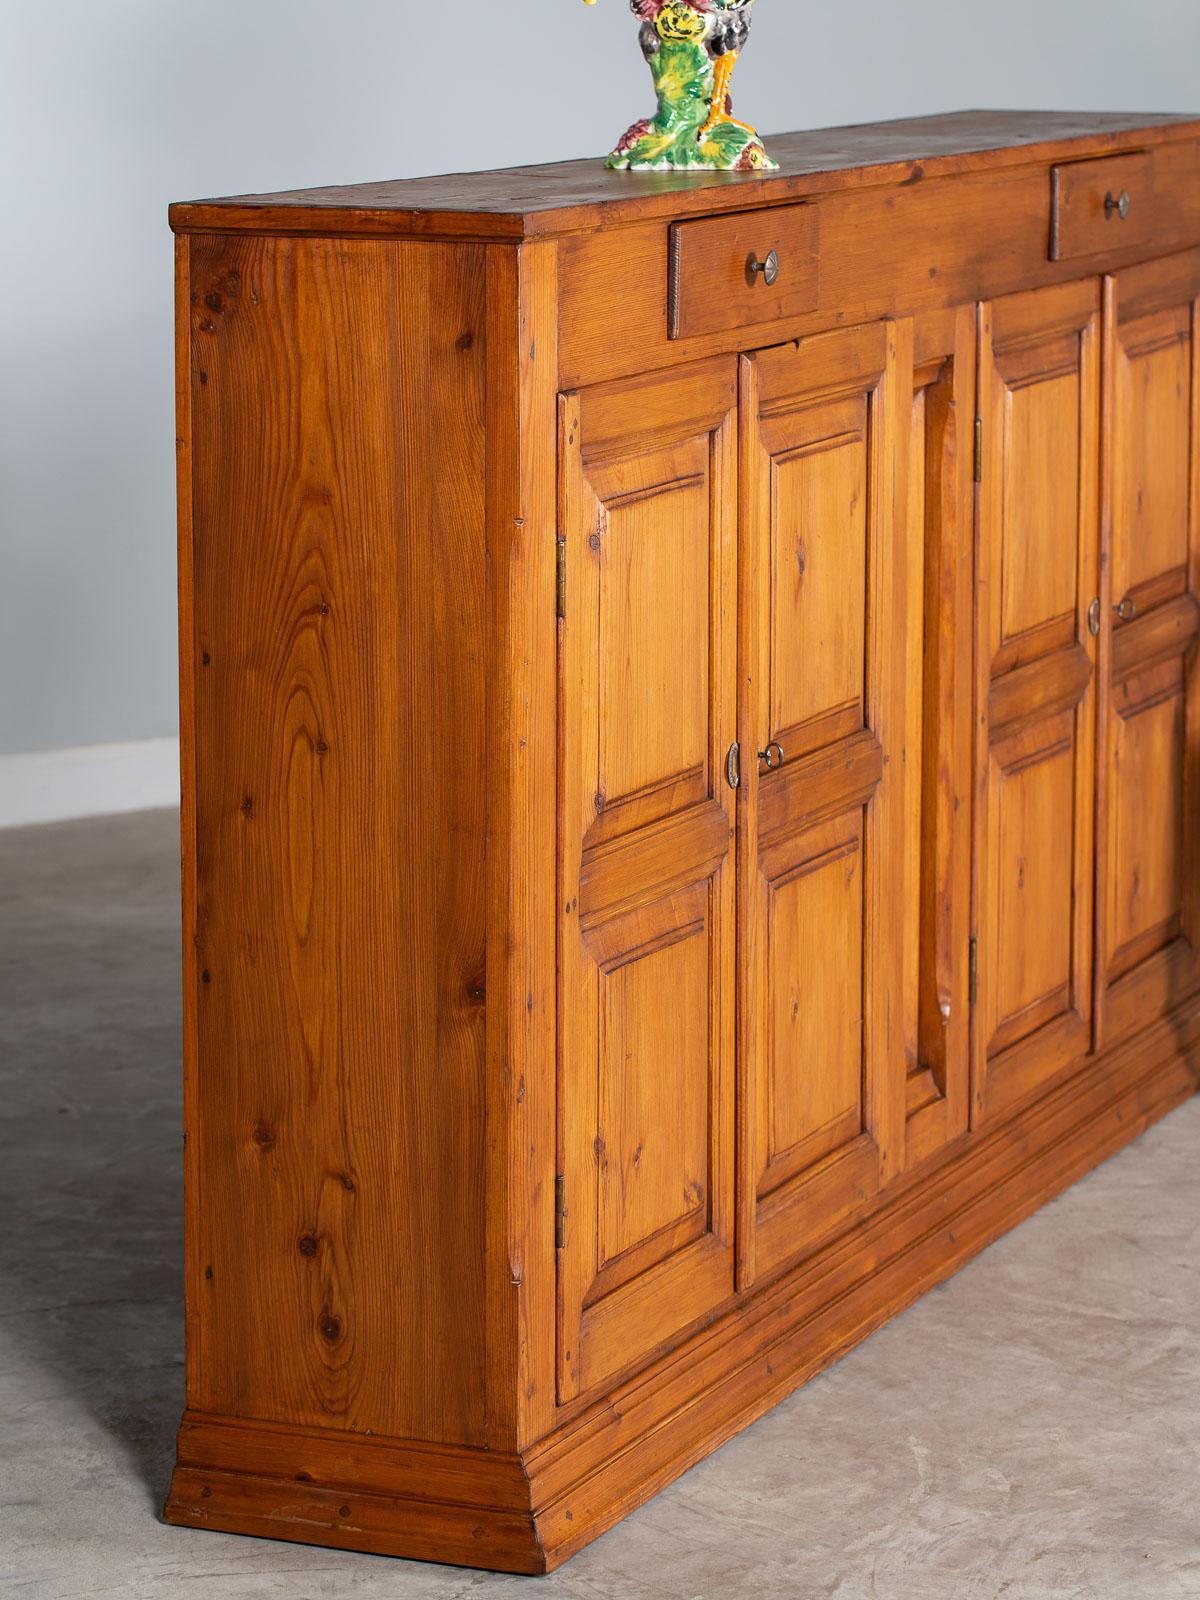 Tall Solid Pine Vintage French Buffet Credenza Cabinet, circa 1930 For Sale 7